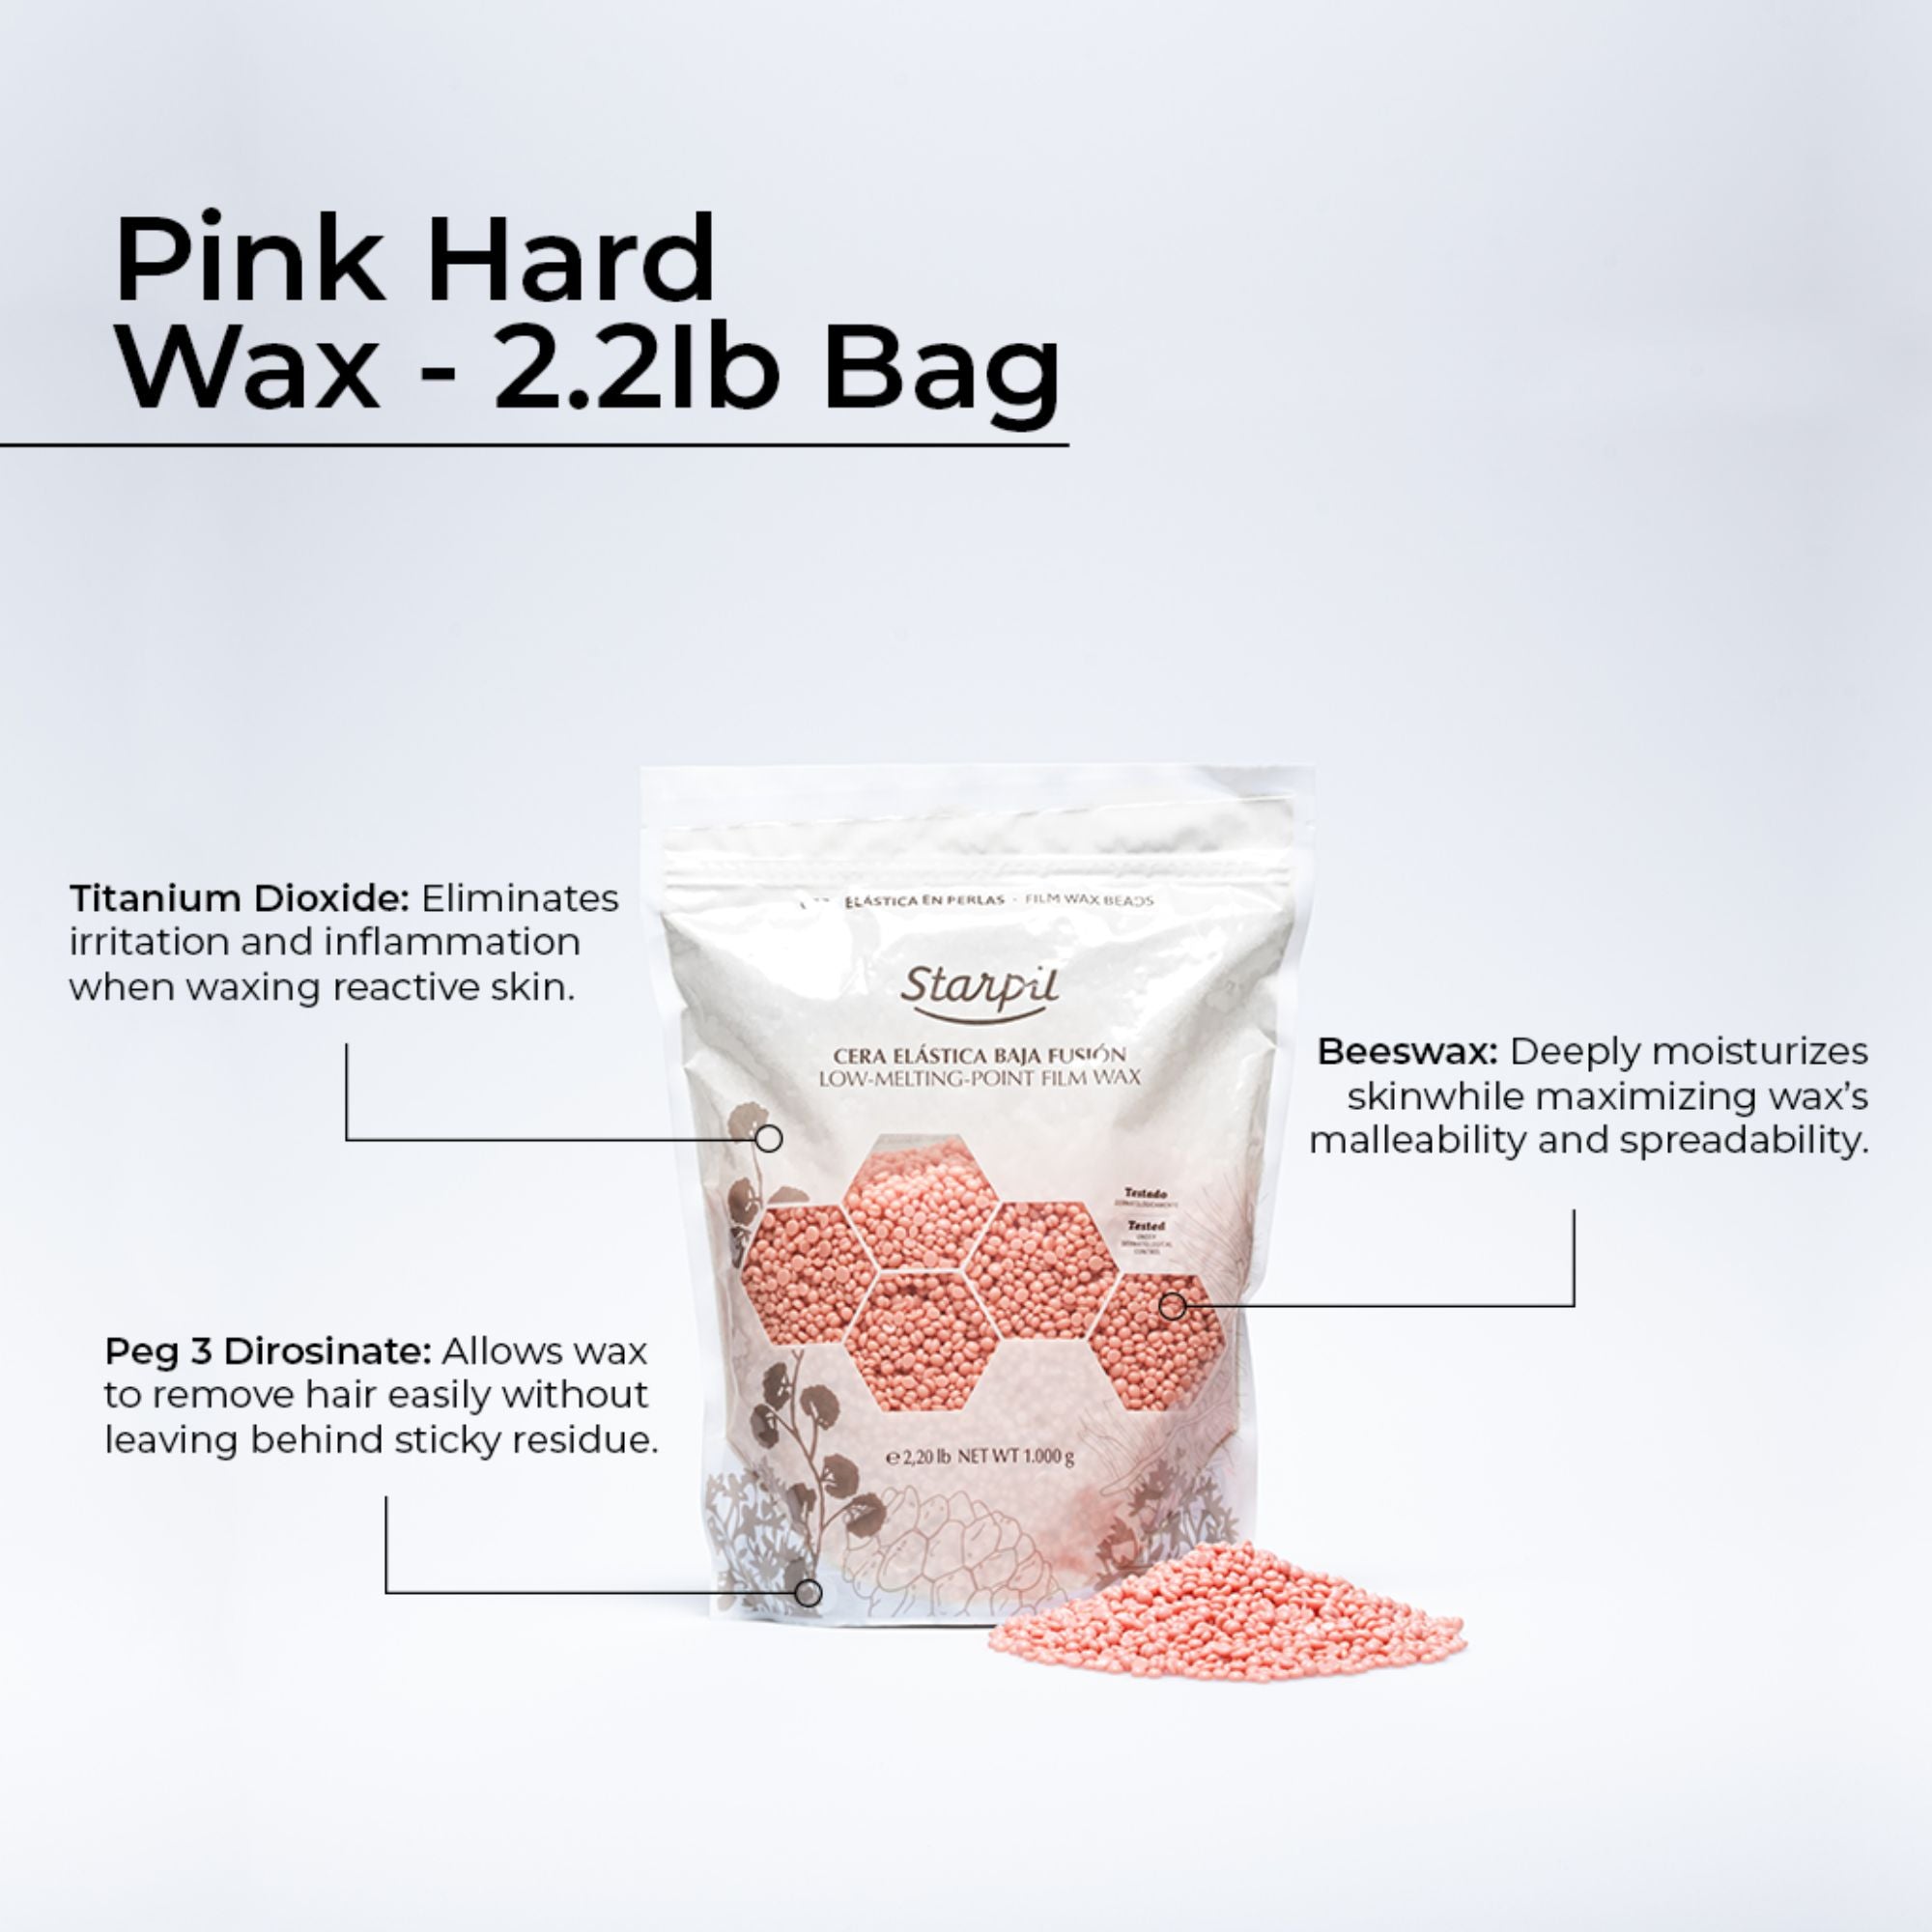 Starpil Wax 2268g / 5 lb Pink Hard Wax Beads for Painless Hair Removal,  Stripless Wax Beads, Polymer Blend Low Temperature Wax for Face, Bikini